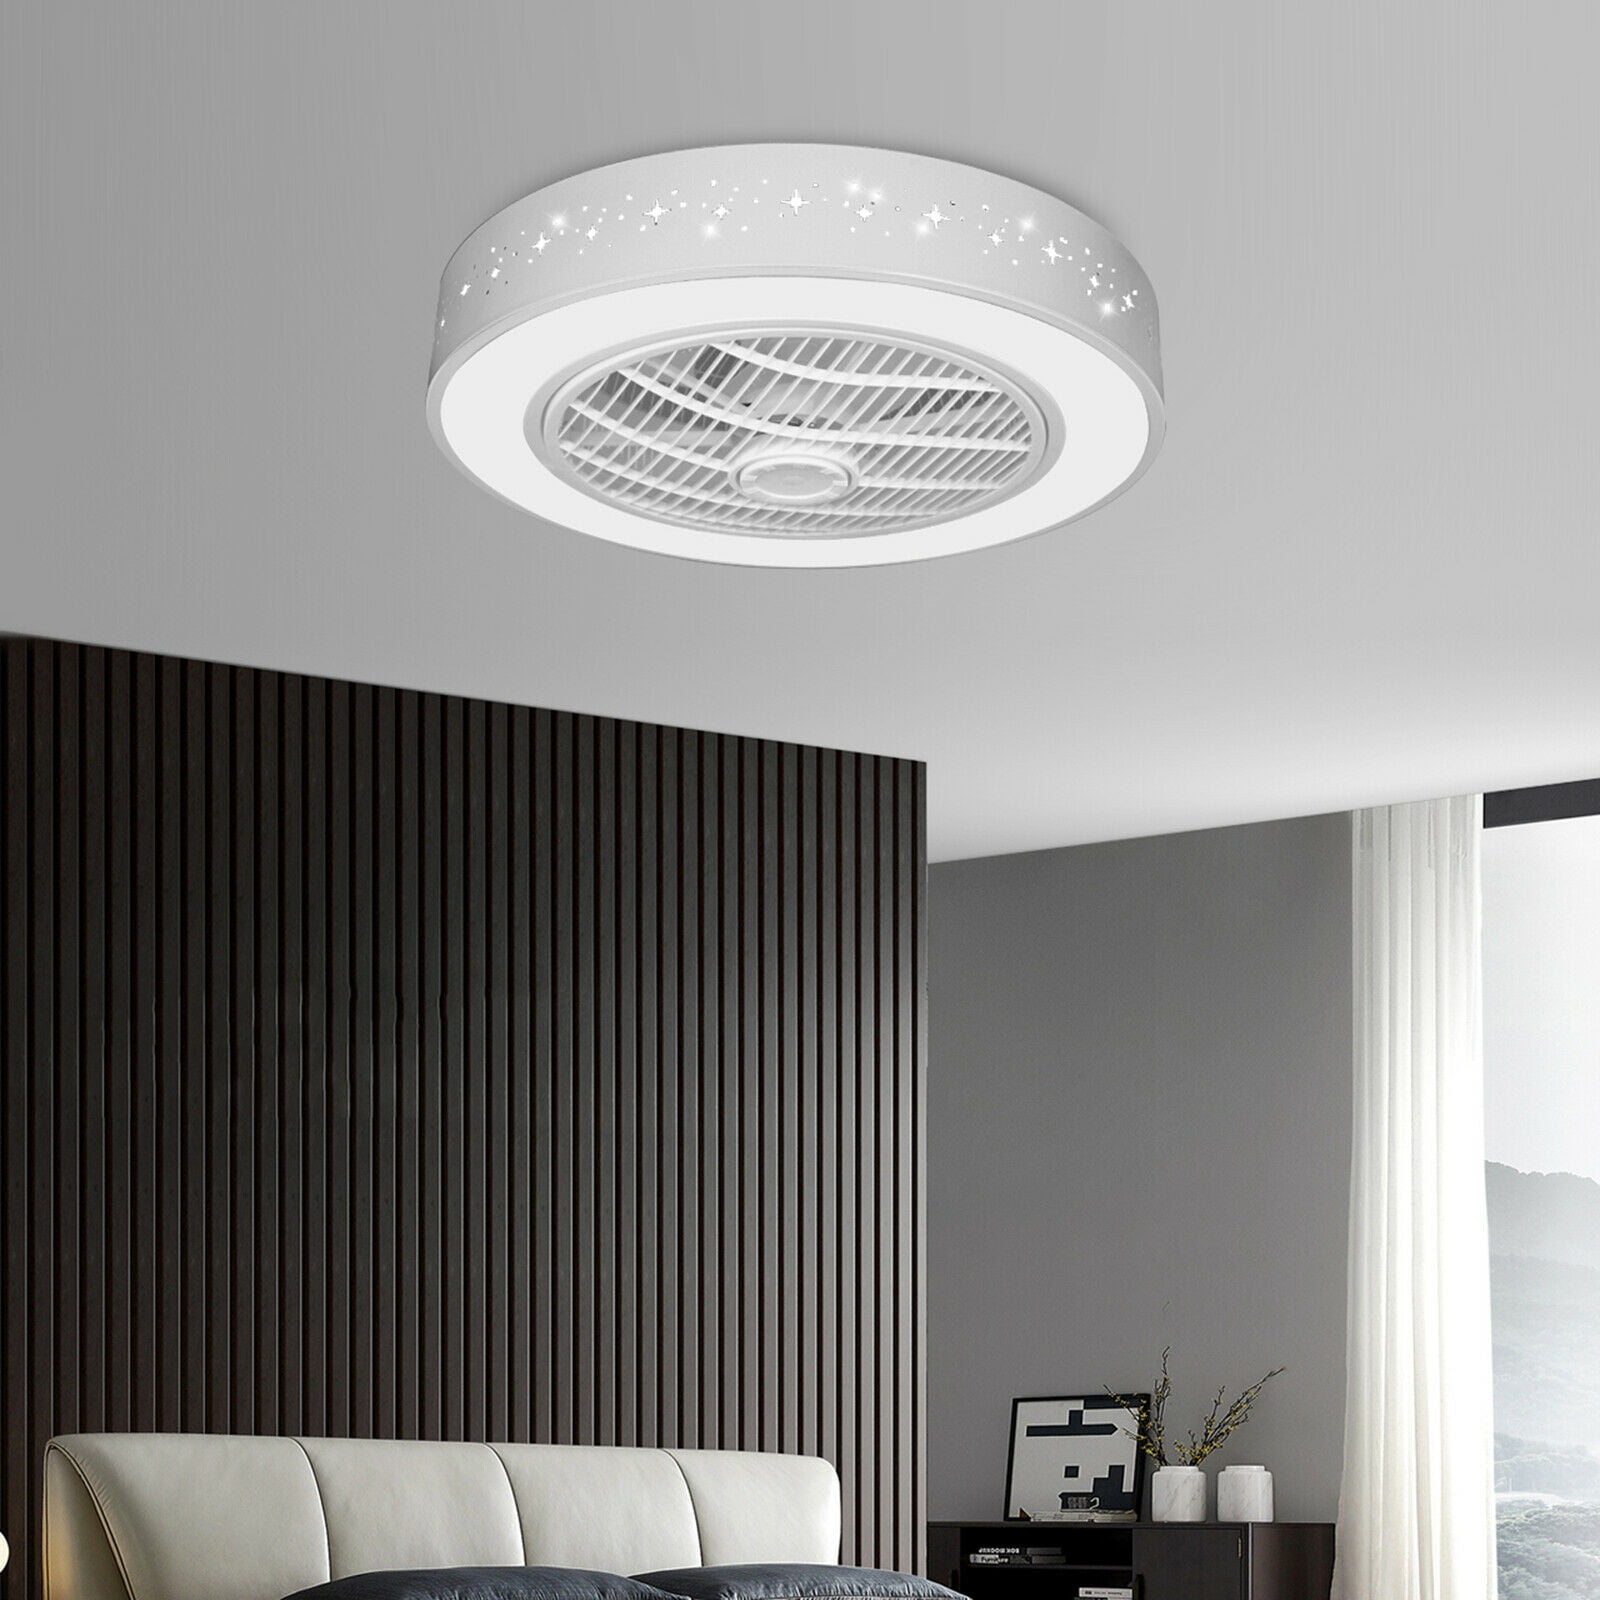 Details about   22" Ceiling Fan With Light Kit Remote Control LED Lamps Dimmable Bedroom Office 